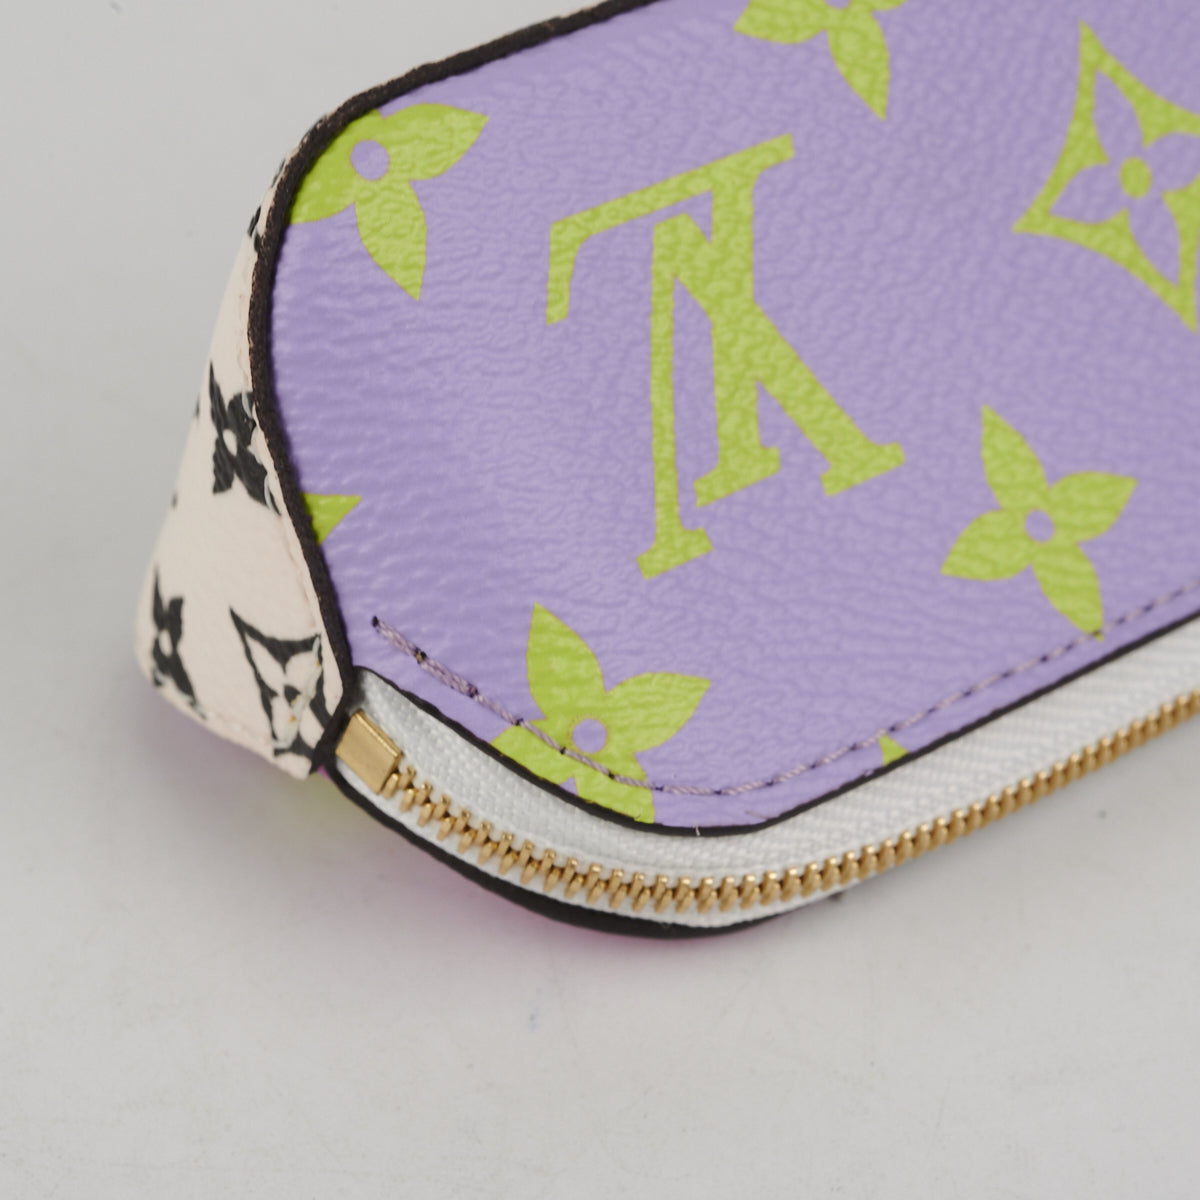 Louis Vuitton is selling a £682 pencil case and people think it's